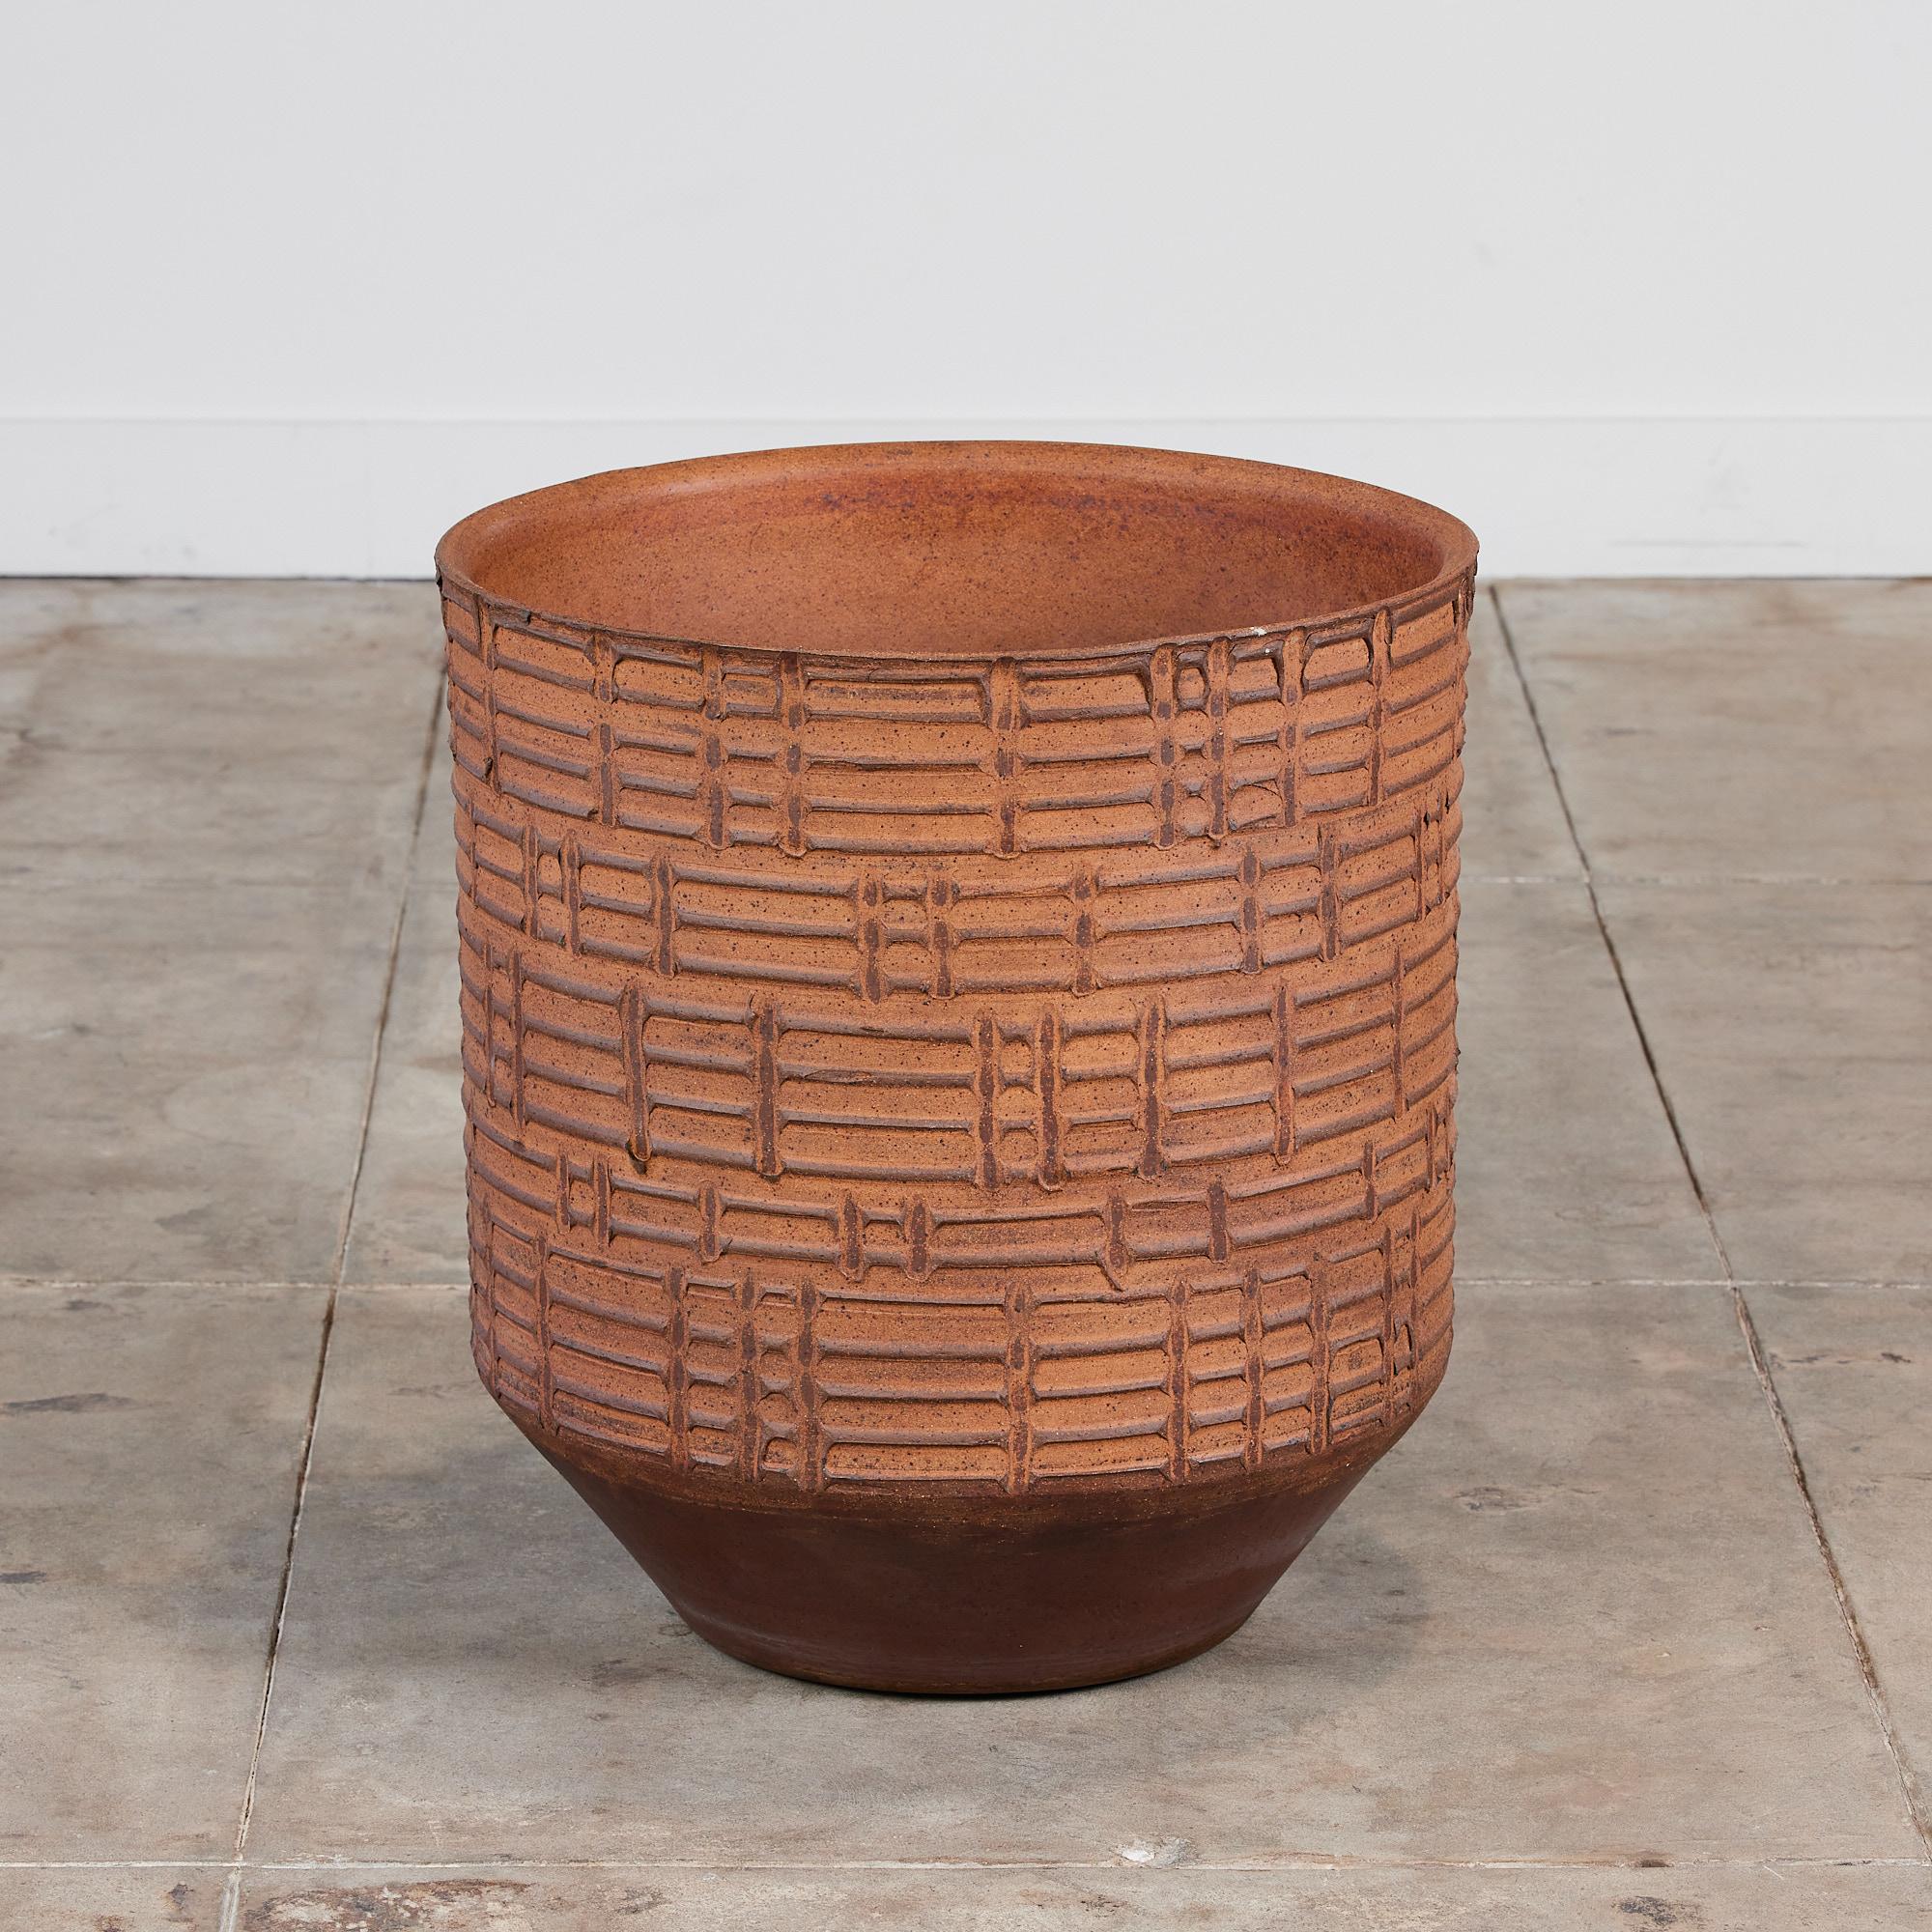 David Cressey Pro/Artisan collection Planter for Architectural Pottery. This stoneware planter has a soft speckled unglazed interior as well as an unglazed natural warm brown clay exterior with the iconic 